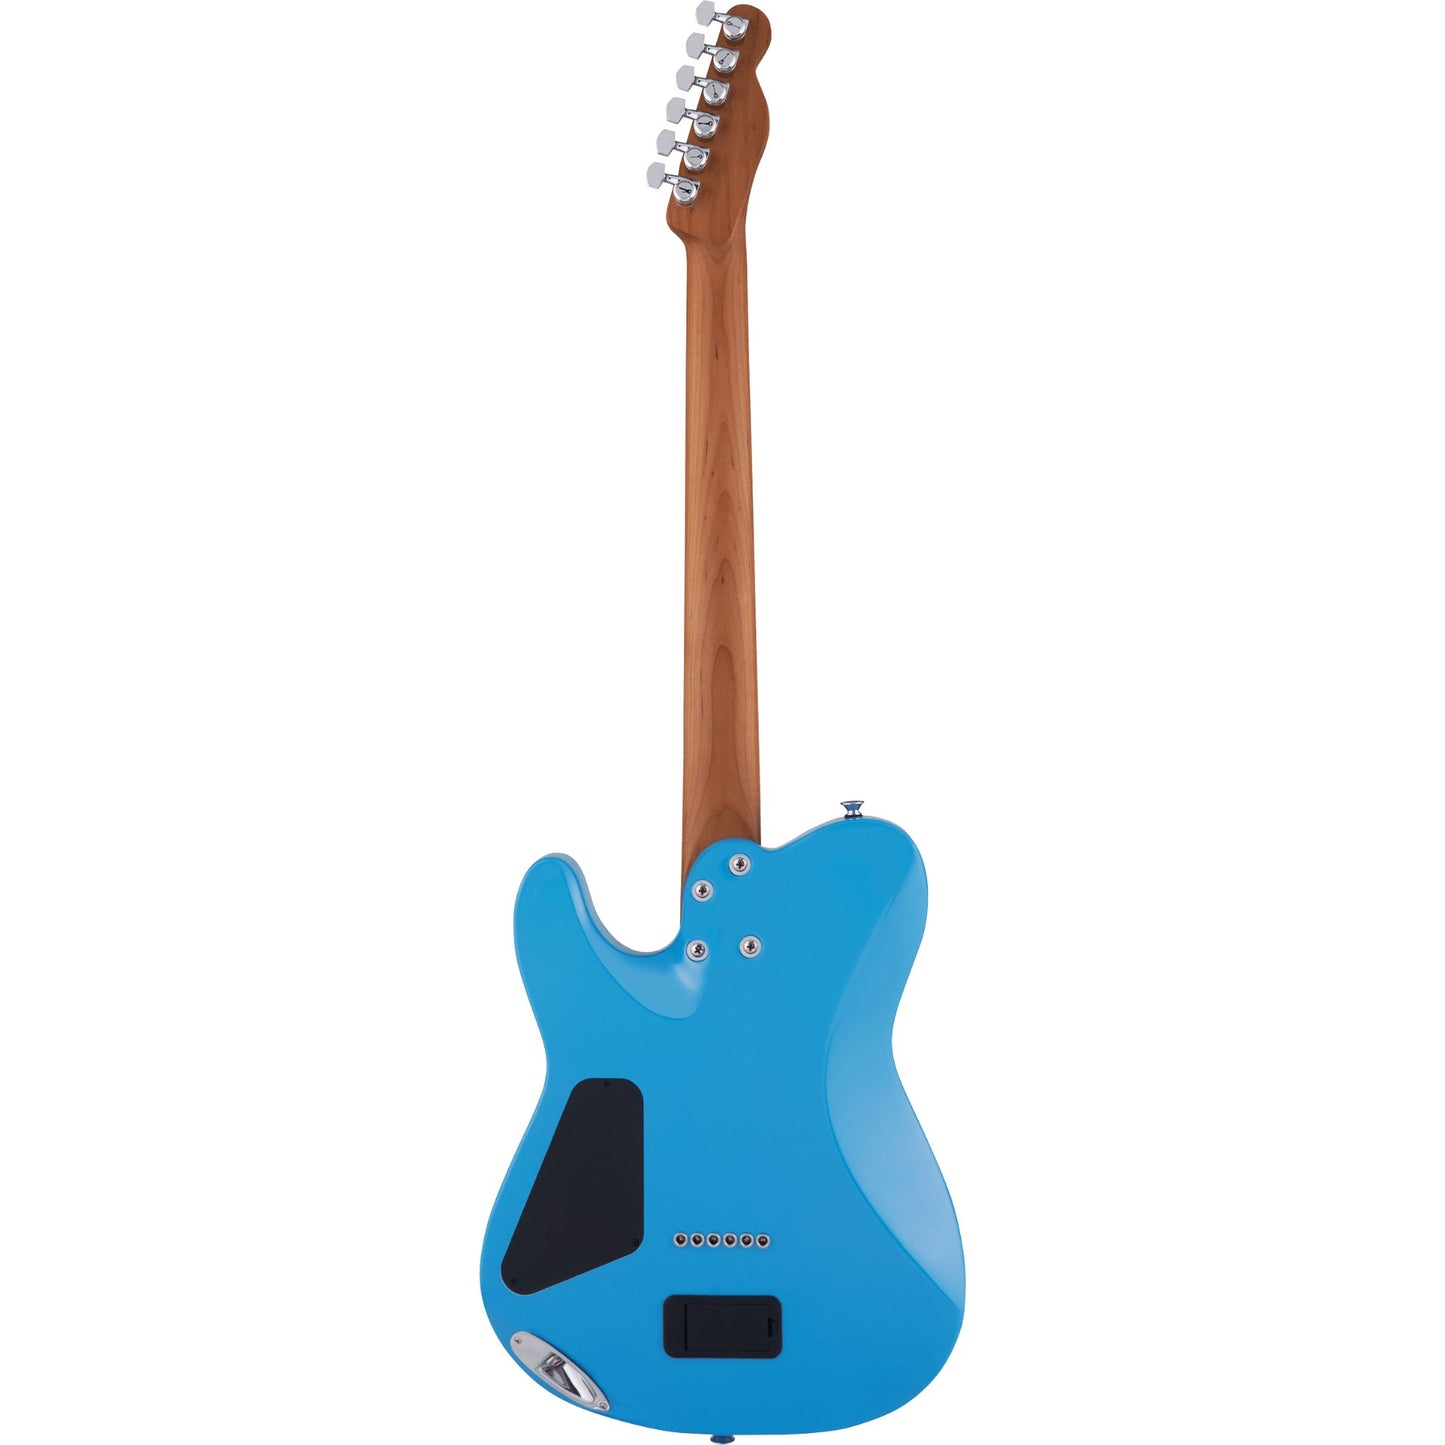 Charvel Pro-Mod So-Cal Style 2 Electric Guitar in Robin’s Egg Blue